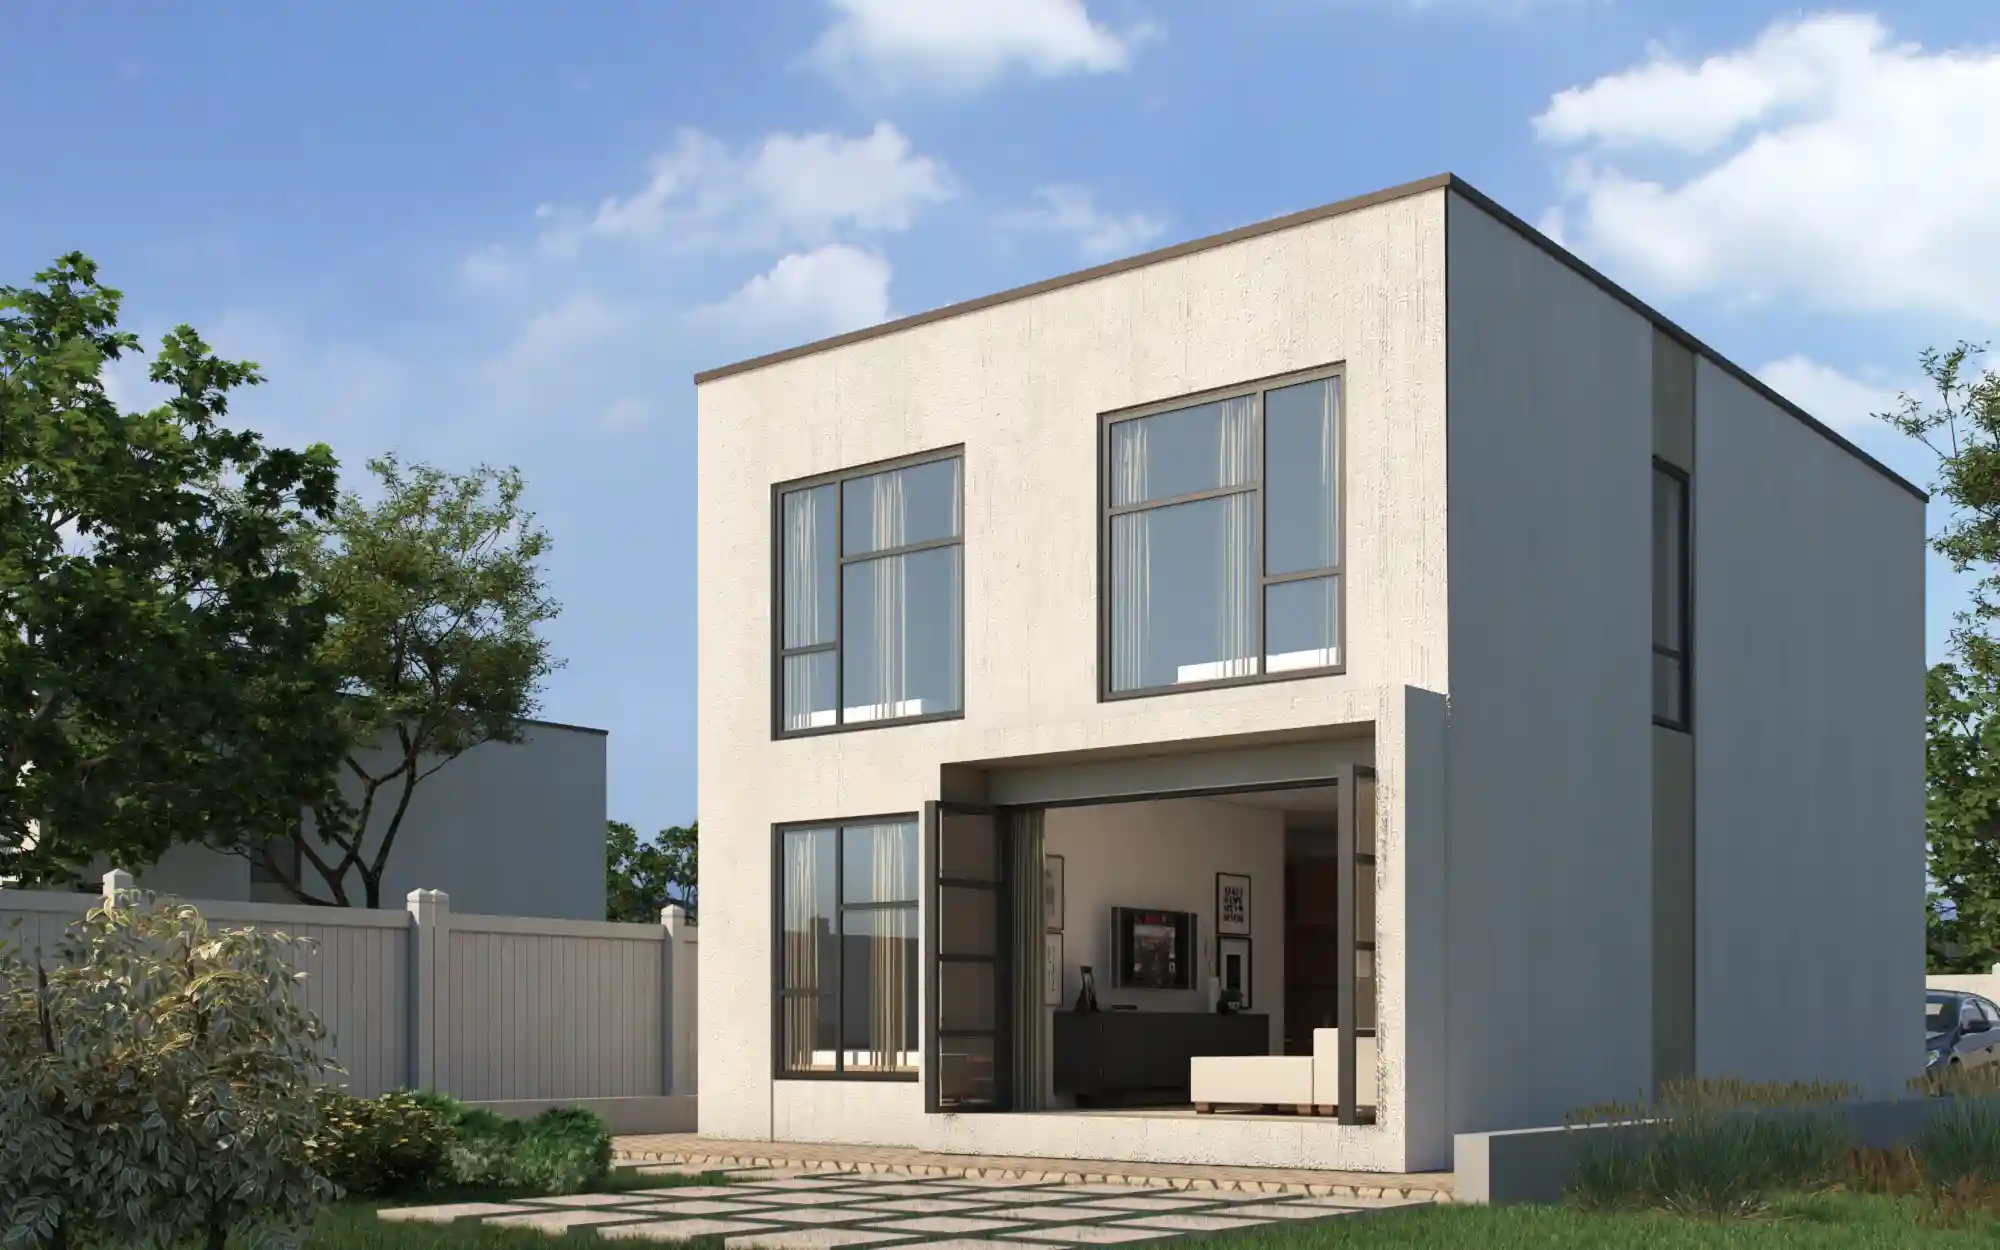 4 Bedroom Maisonette - ID 42101 - Rear from Inuua Tujenge house plans with 4 bedrooms and 3 bathrooms. ( maisonette )